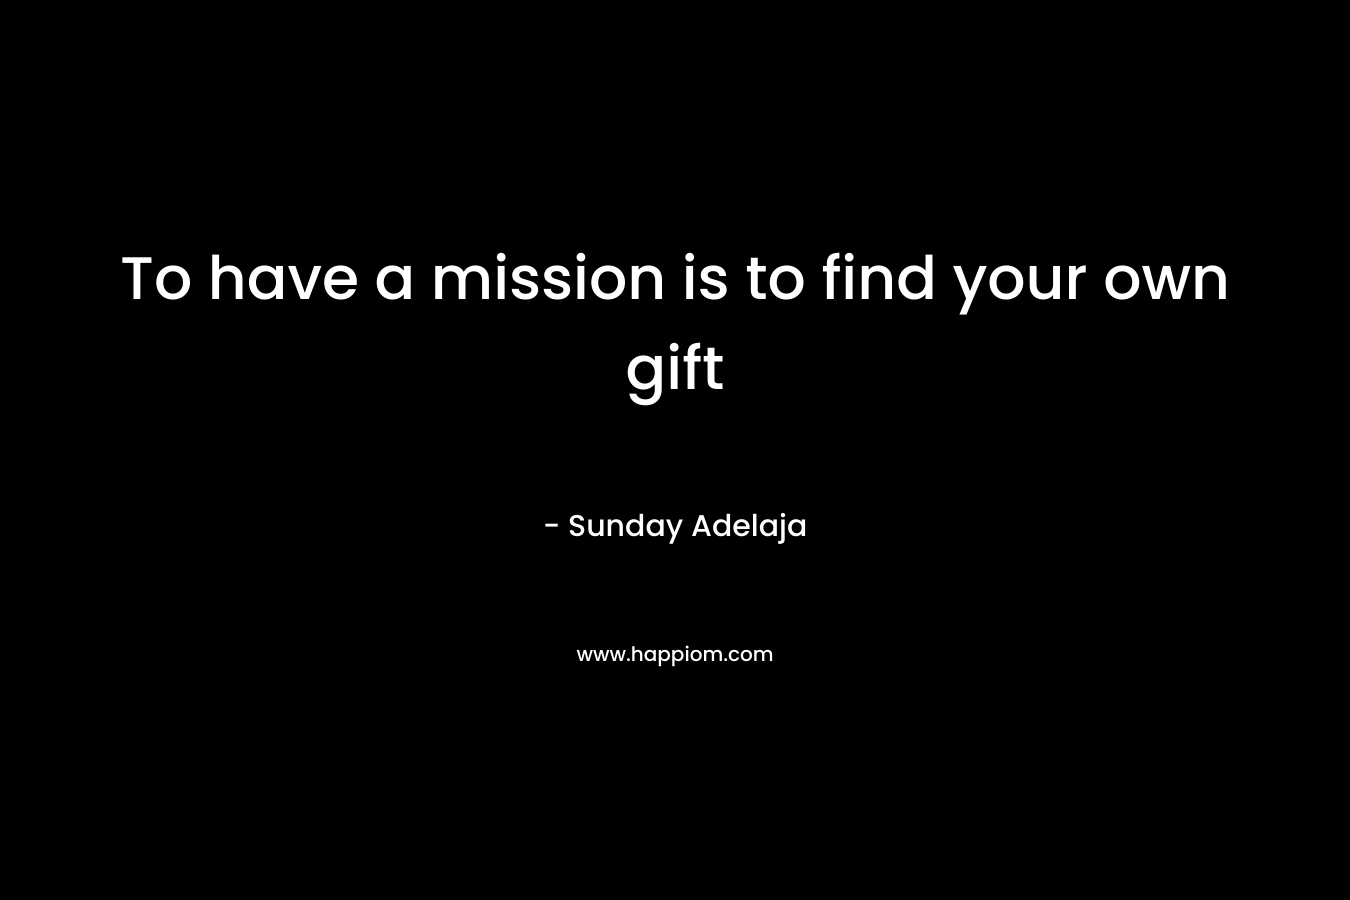 To have a mission is to find your own gift